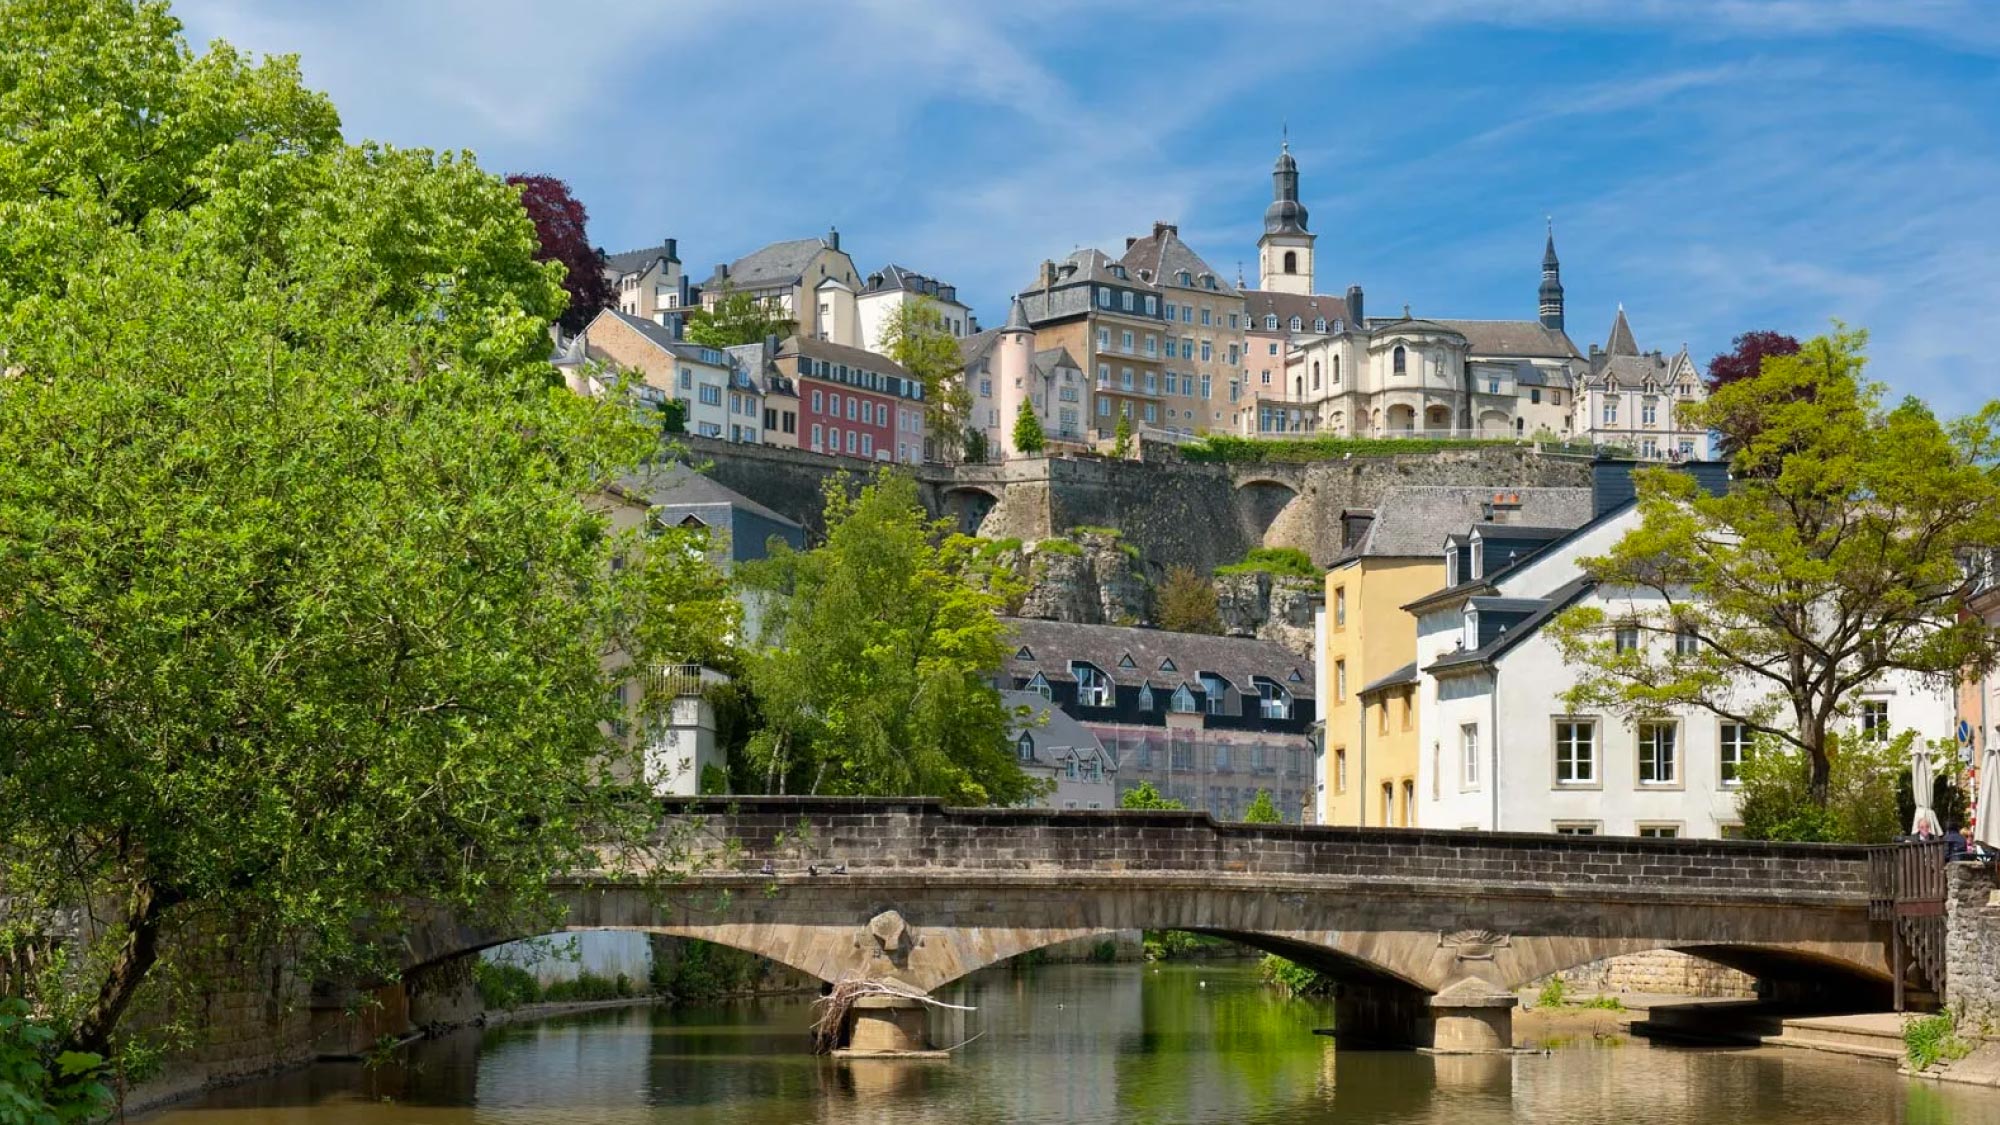 A picturesque view of Luxembourg City, featuring its iconic medieval fortifications, historic buildings, and lush greenery. Luxembourg is a highlight of a journey to Australia, visiting 21 countries, ideal for travelers who fly and own their own airplanes.